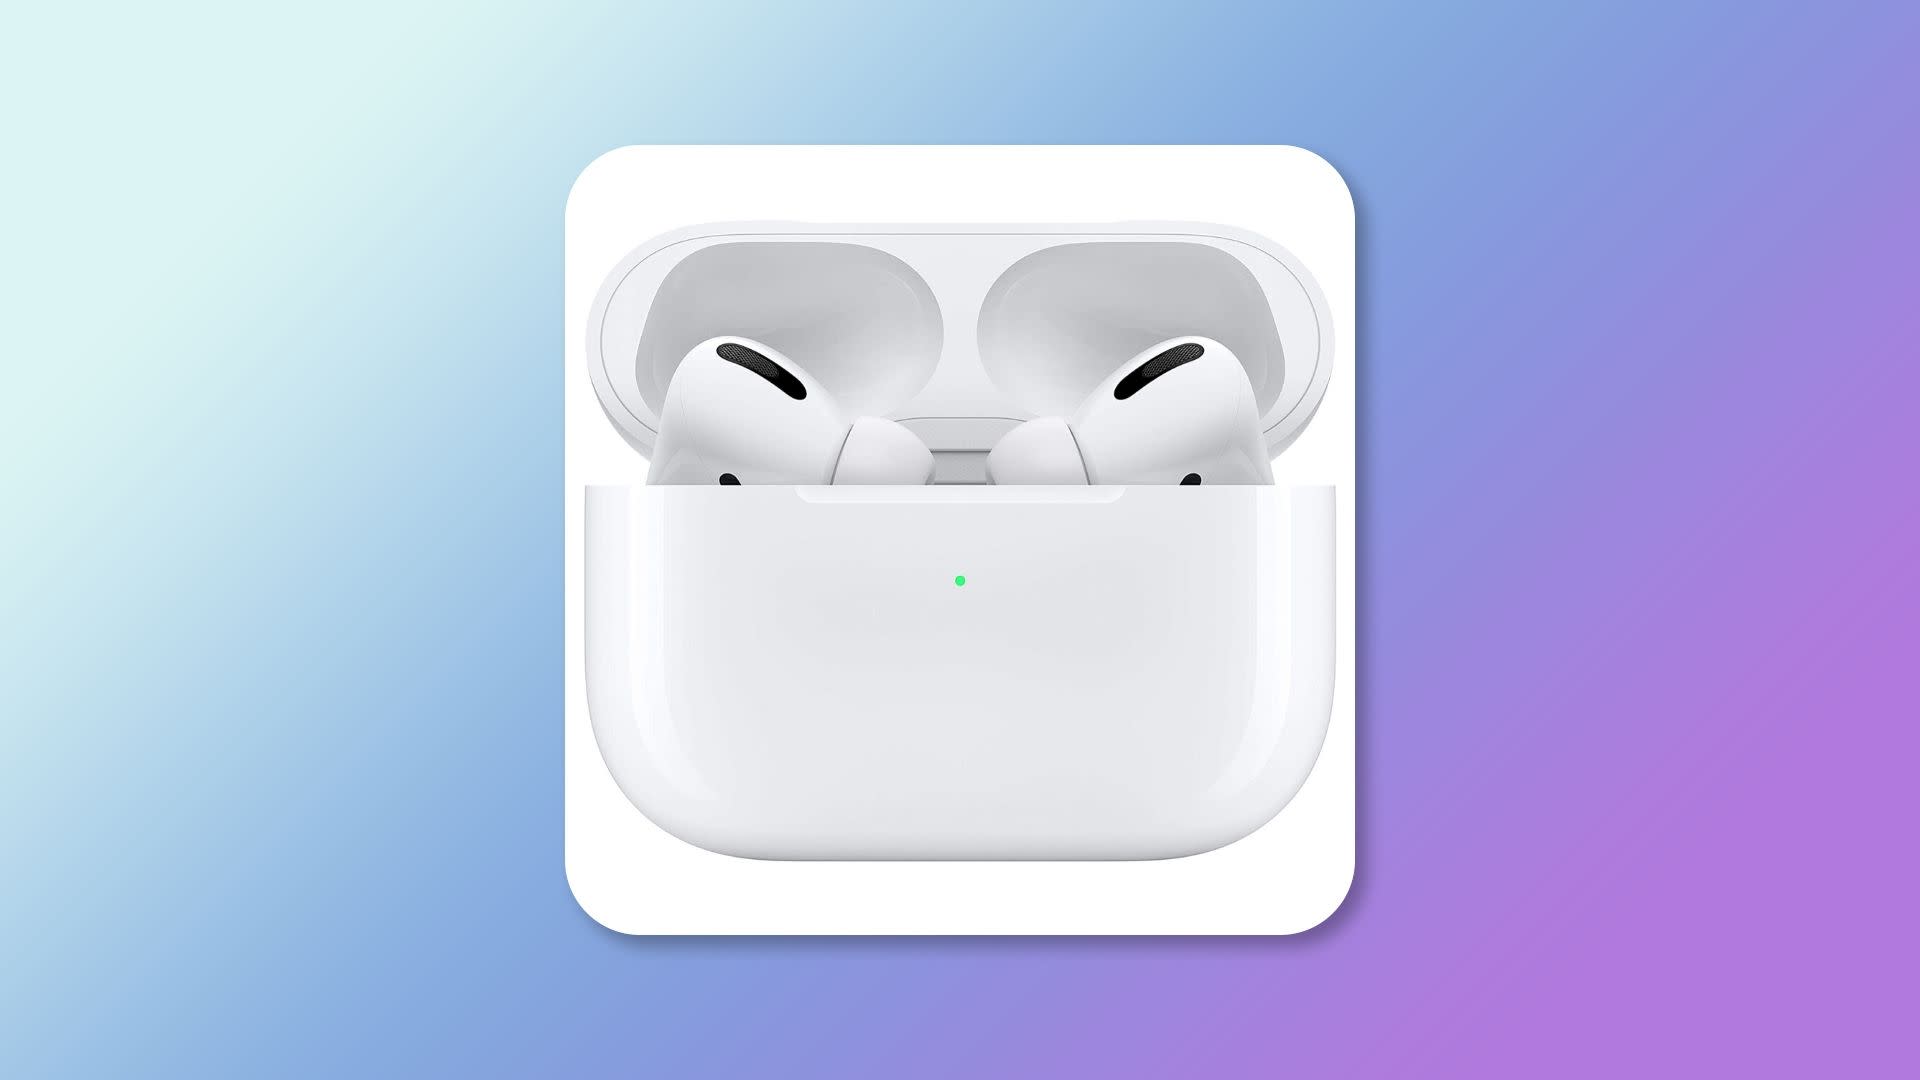 You can get the Apple AirPods Pro on sale at Amazon right now